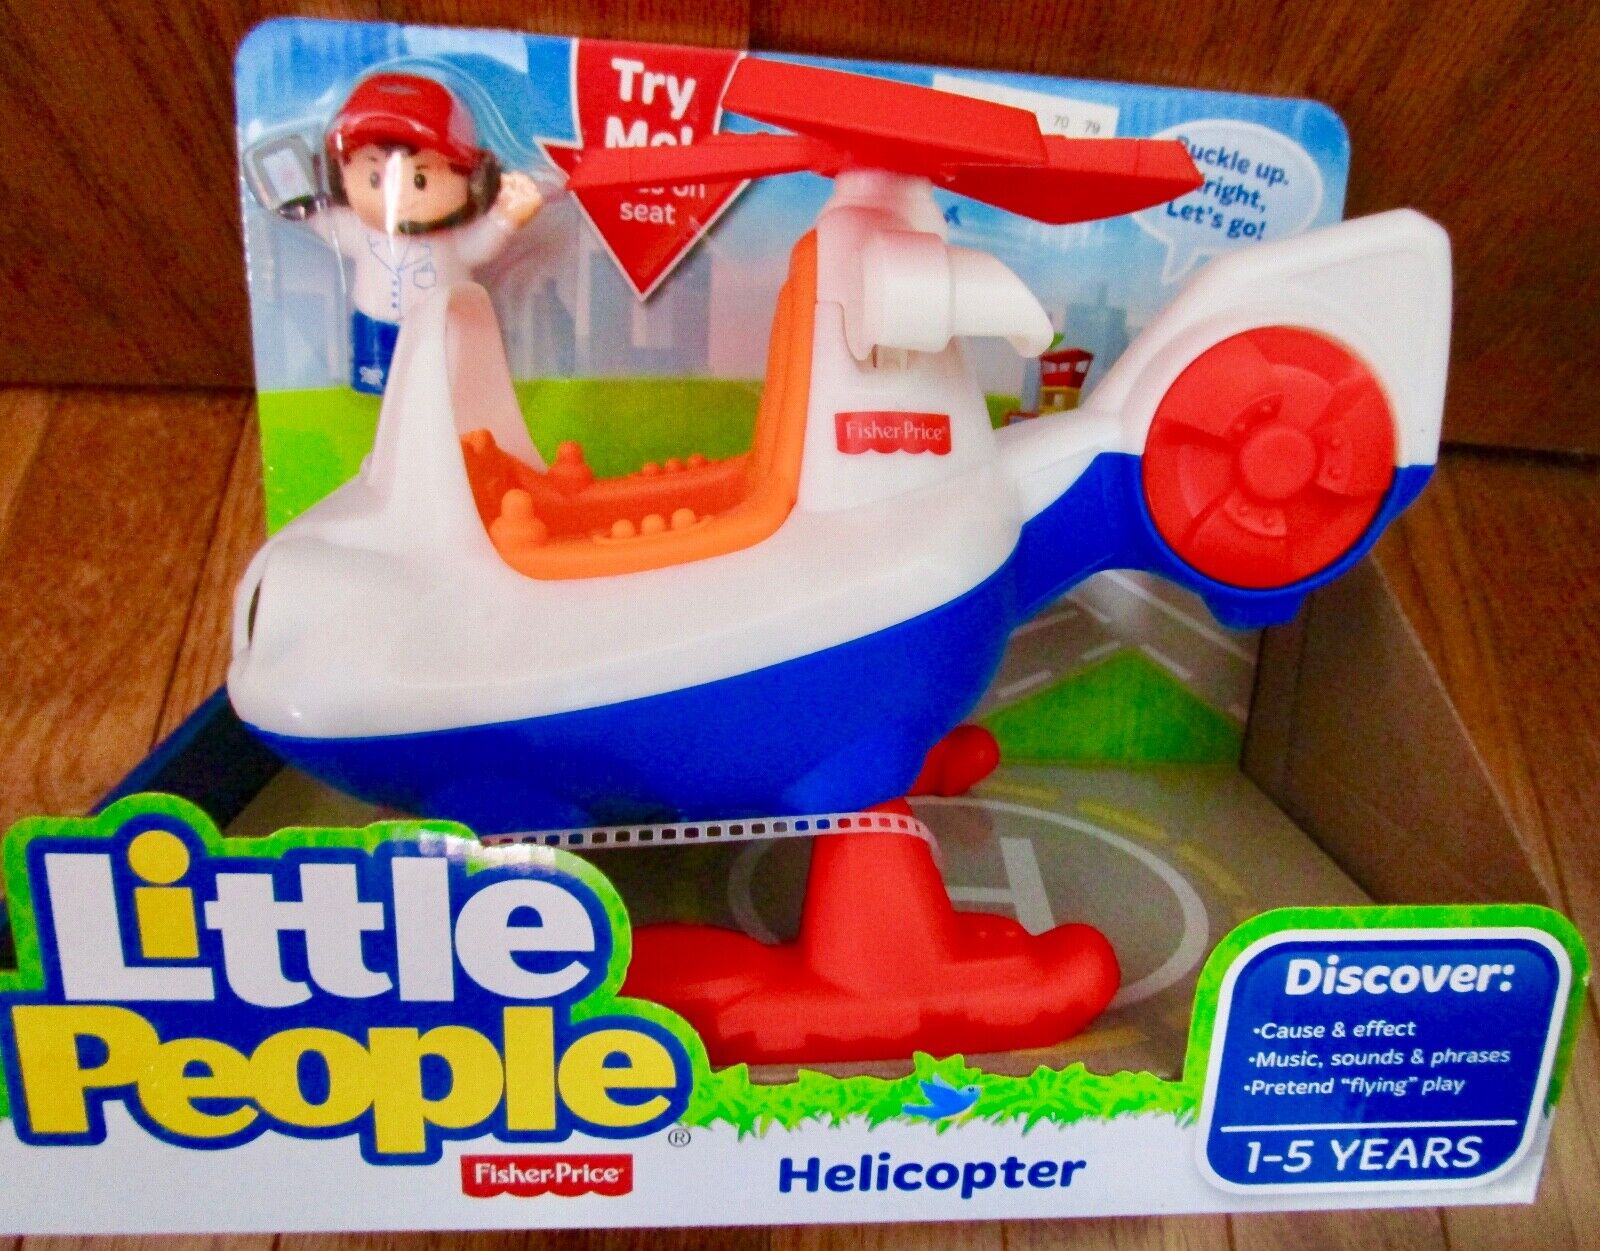 Toy Vehicle and Figure Set for Toddlers and Preschool Kids Ages 1-5 Years Fisher-Price Little People Helicopter